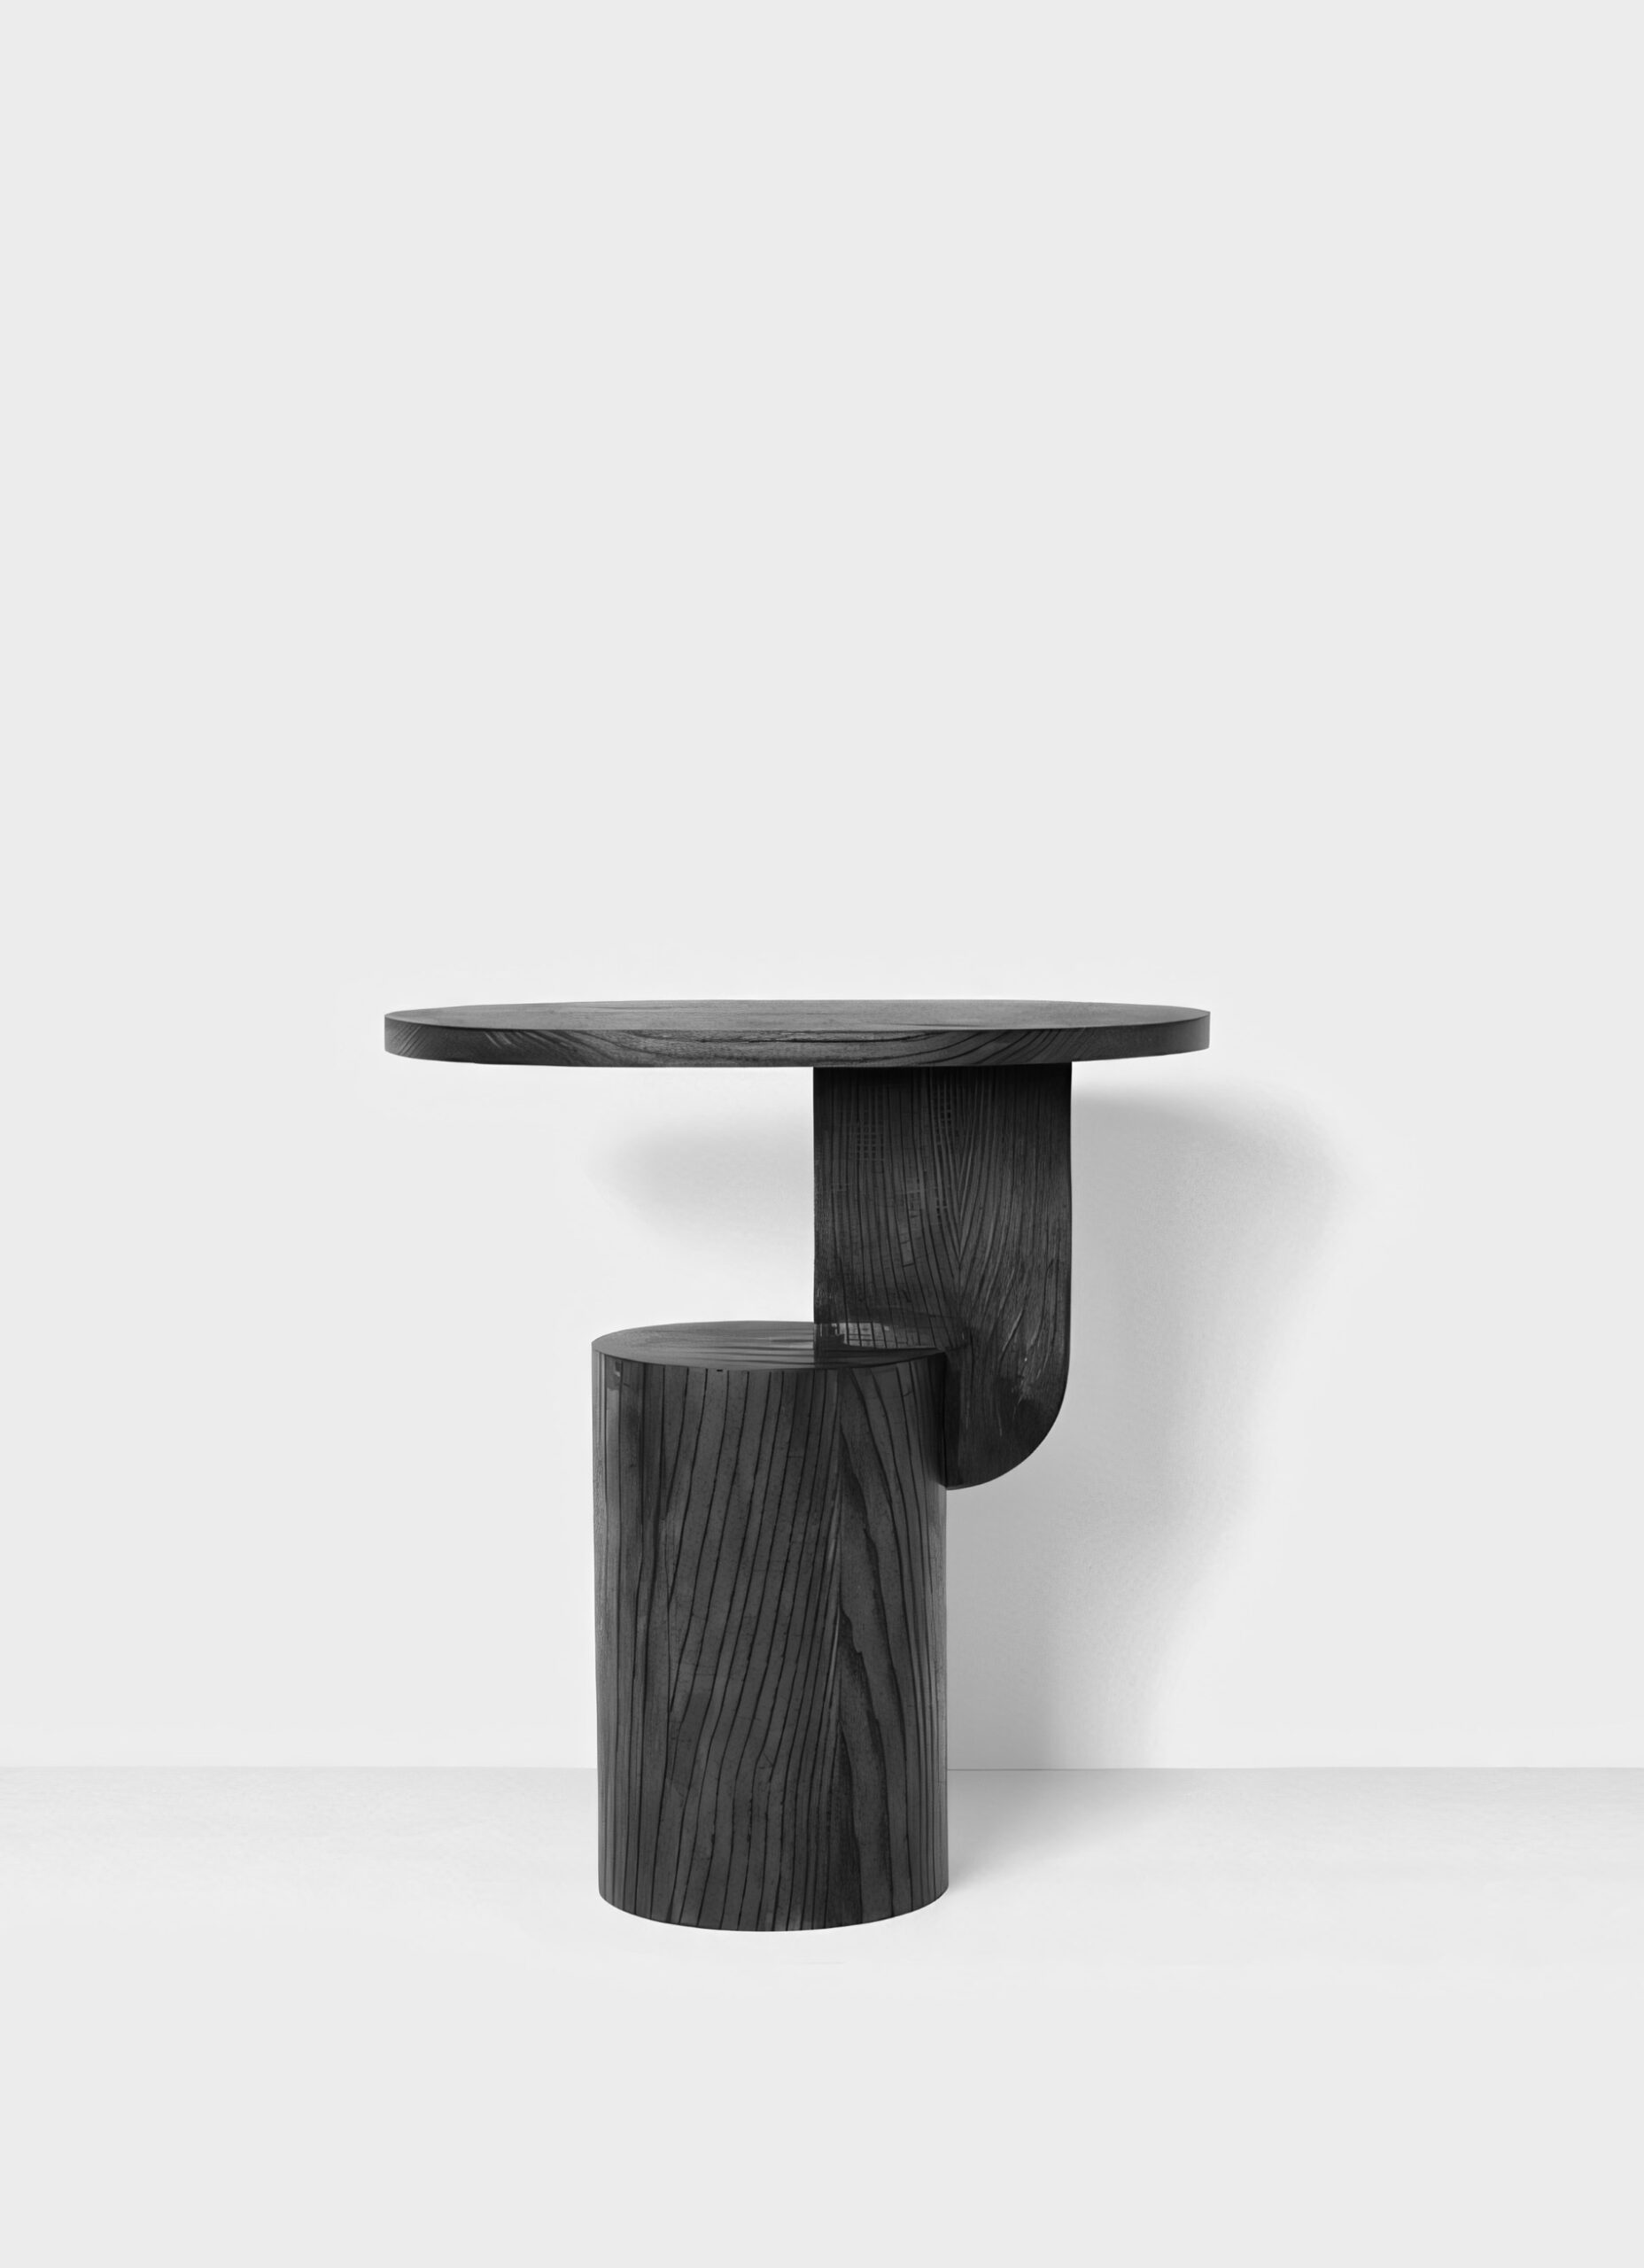 Minimalist Table Collection "Insert" by Mario Tsai for fermLiving